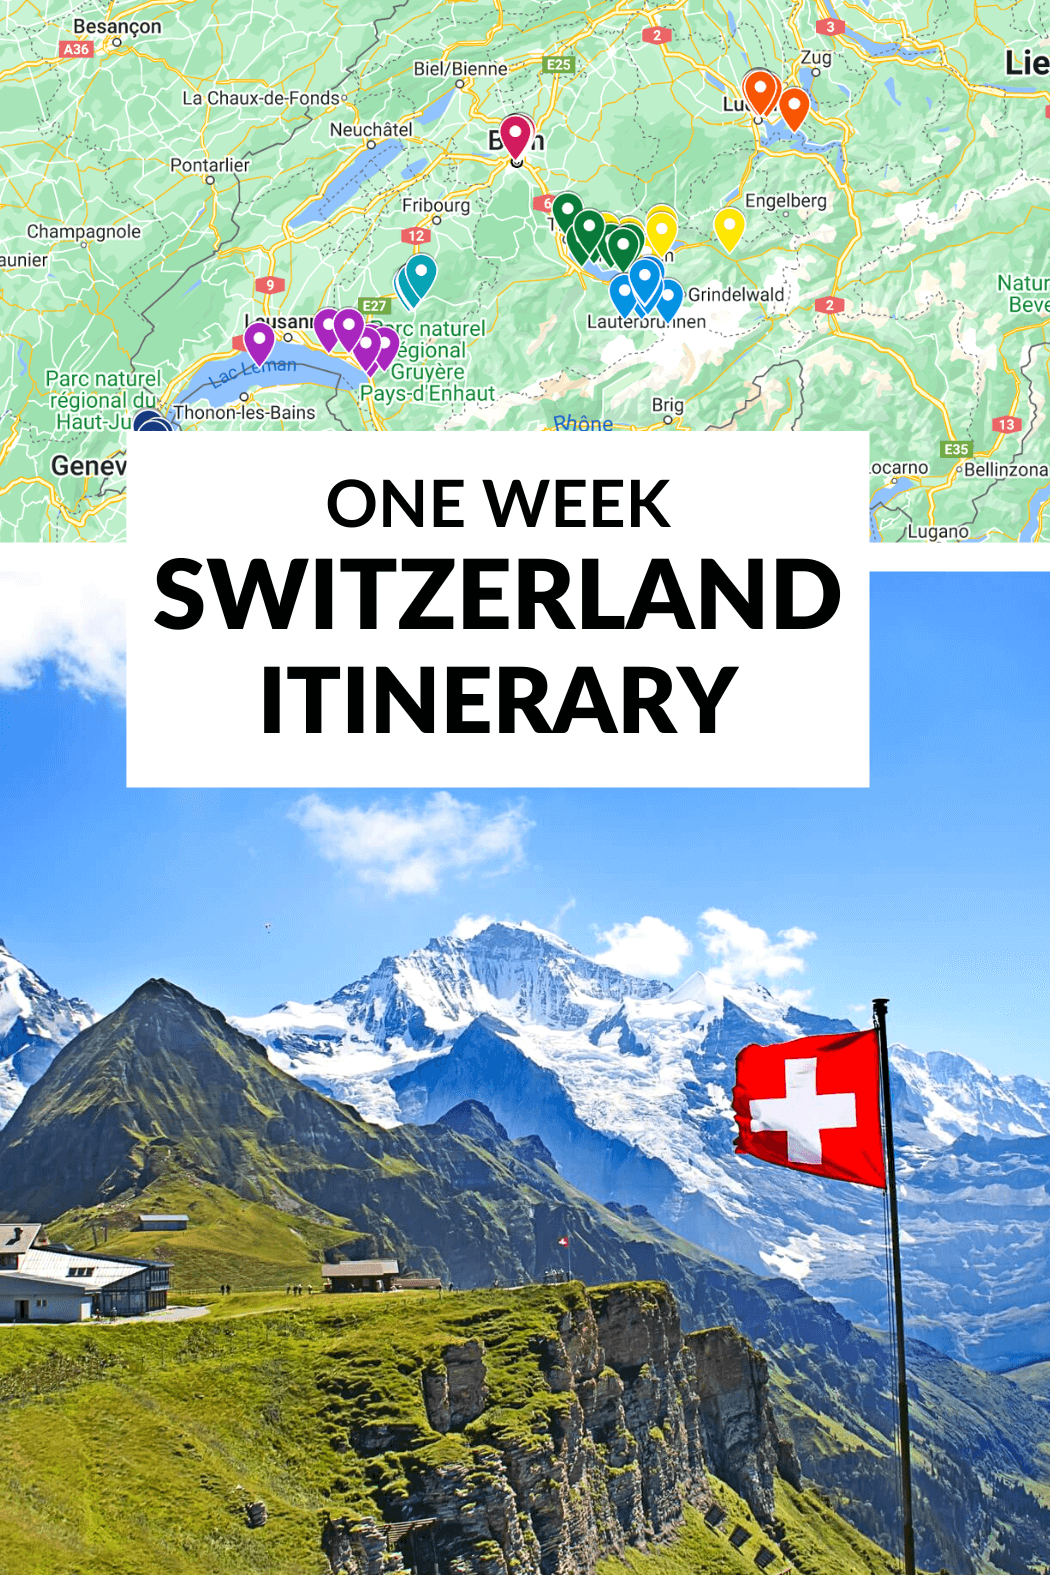 If you're looking to spend 7 days in Switzerland, or even 10, this Switzerland Itinerary will help you plan the perfect trip for your first time. With day-by-day itineraries and detailed activity suggestions, you'll be on your way to enjoying one of the most beautiful places on Earth!